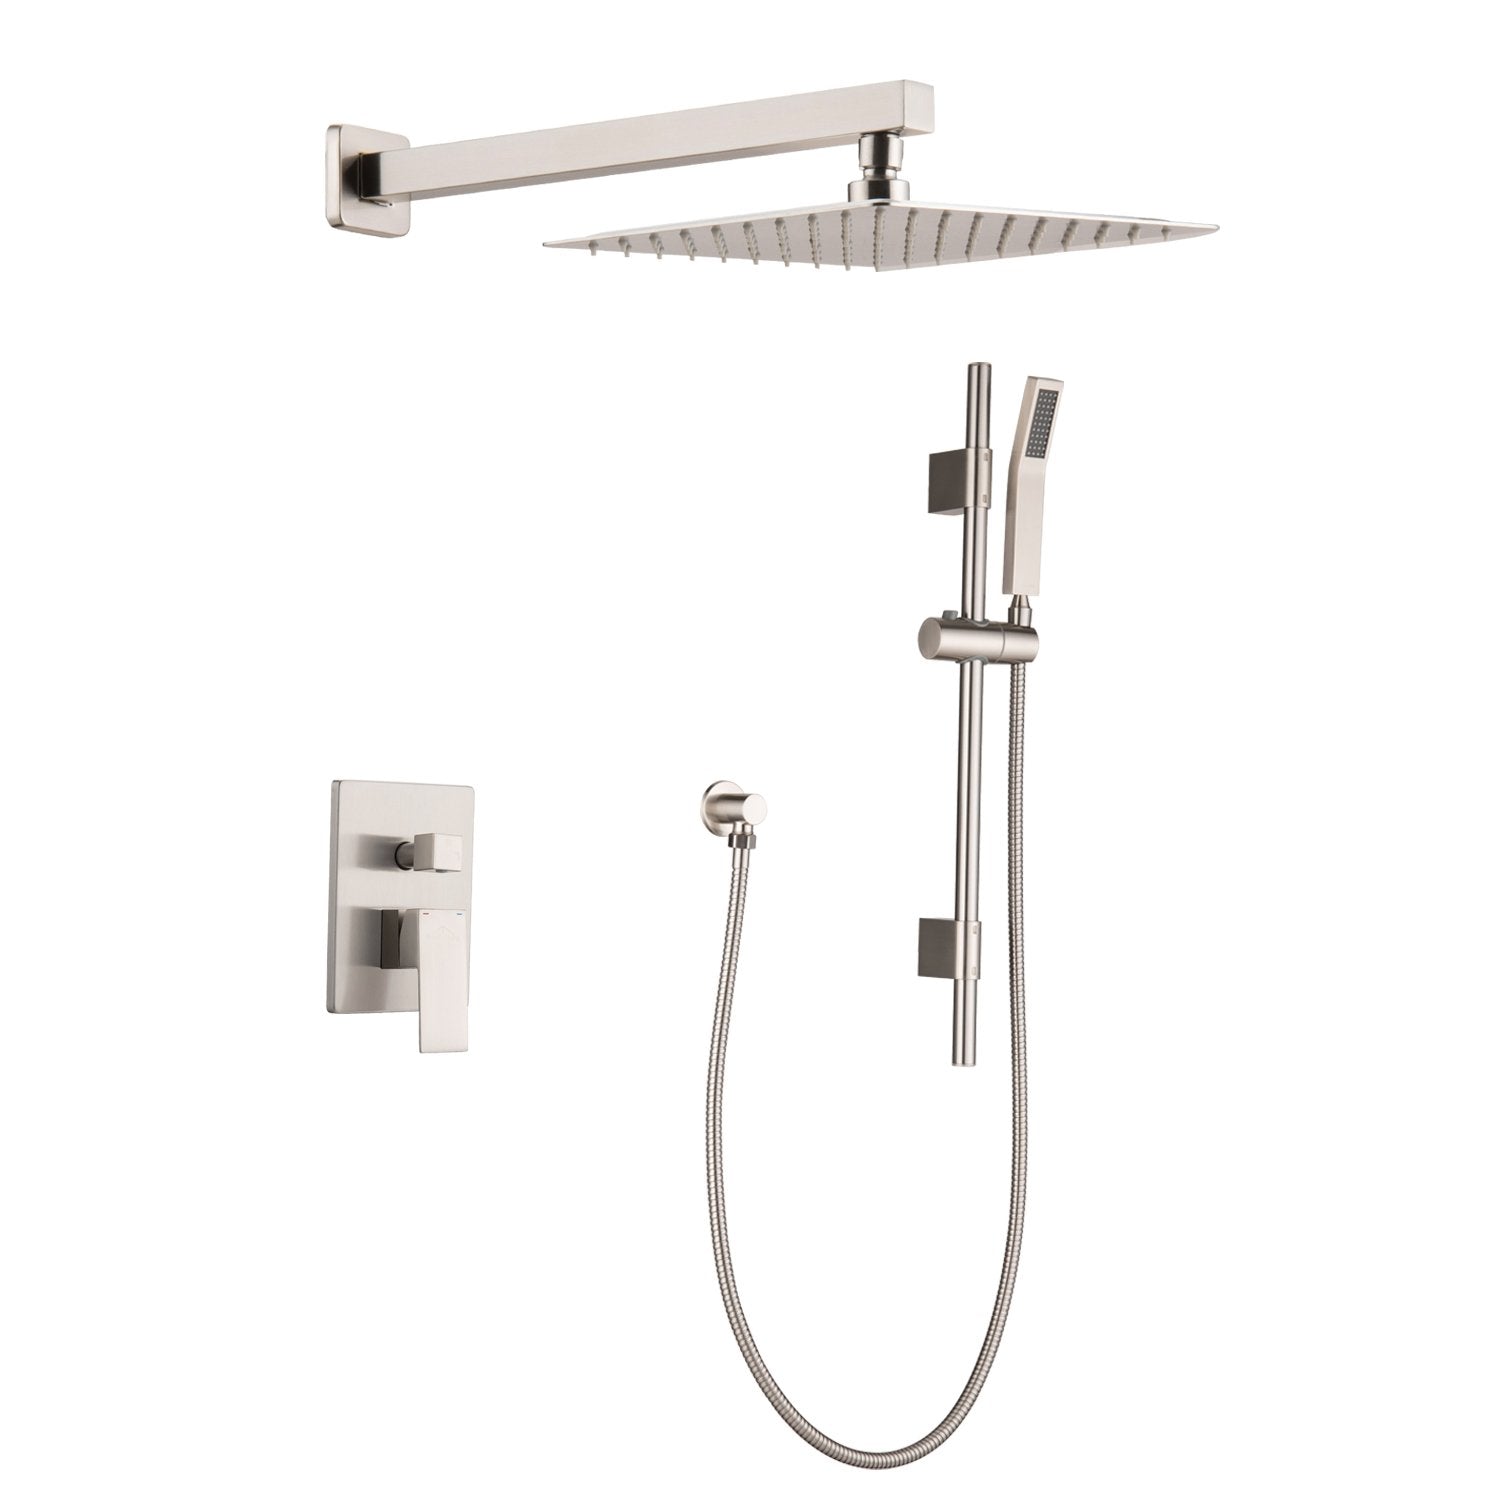 1-Spray Patterns with 2.5 GPM Wall Mount Dual Shower Heads in Brushed Nickel